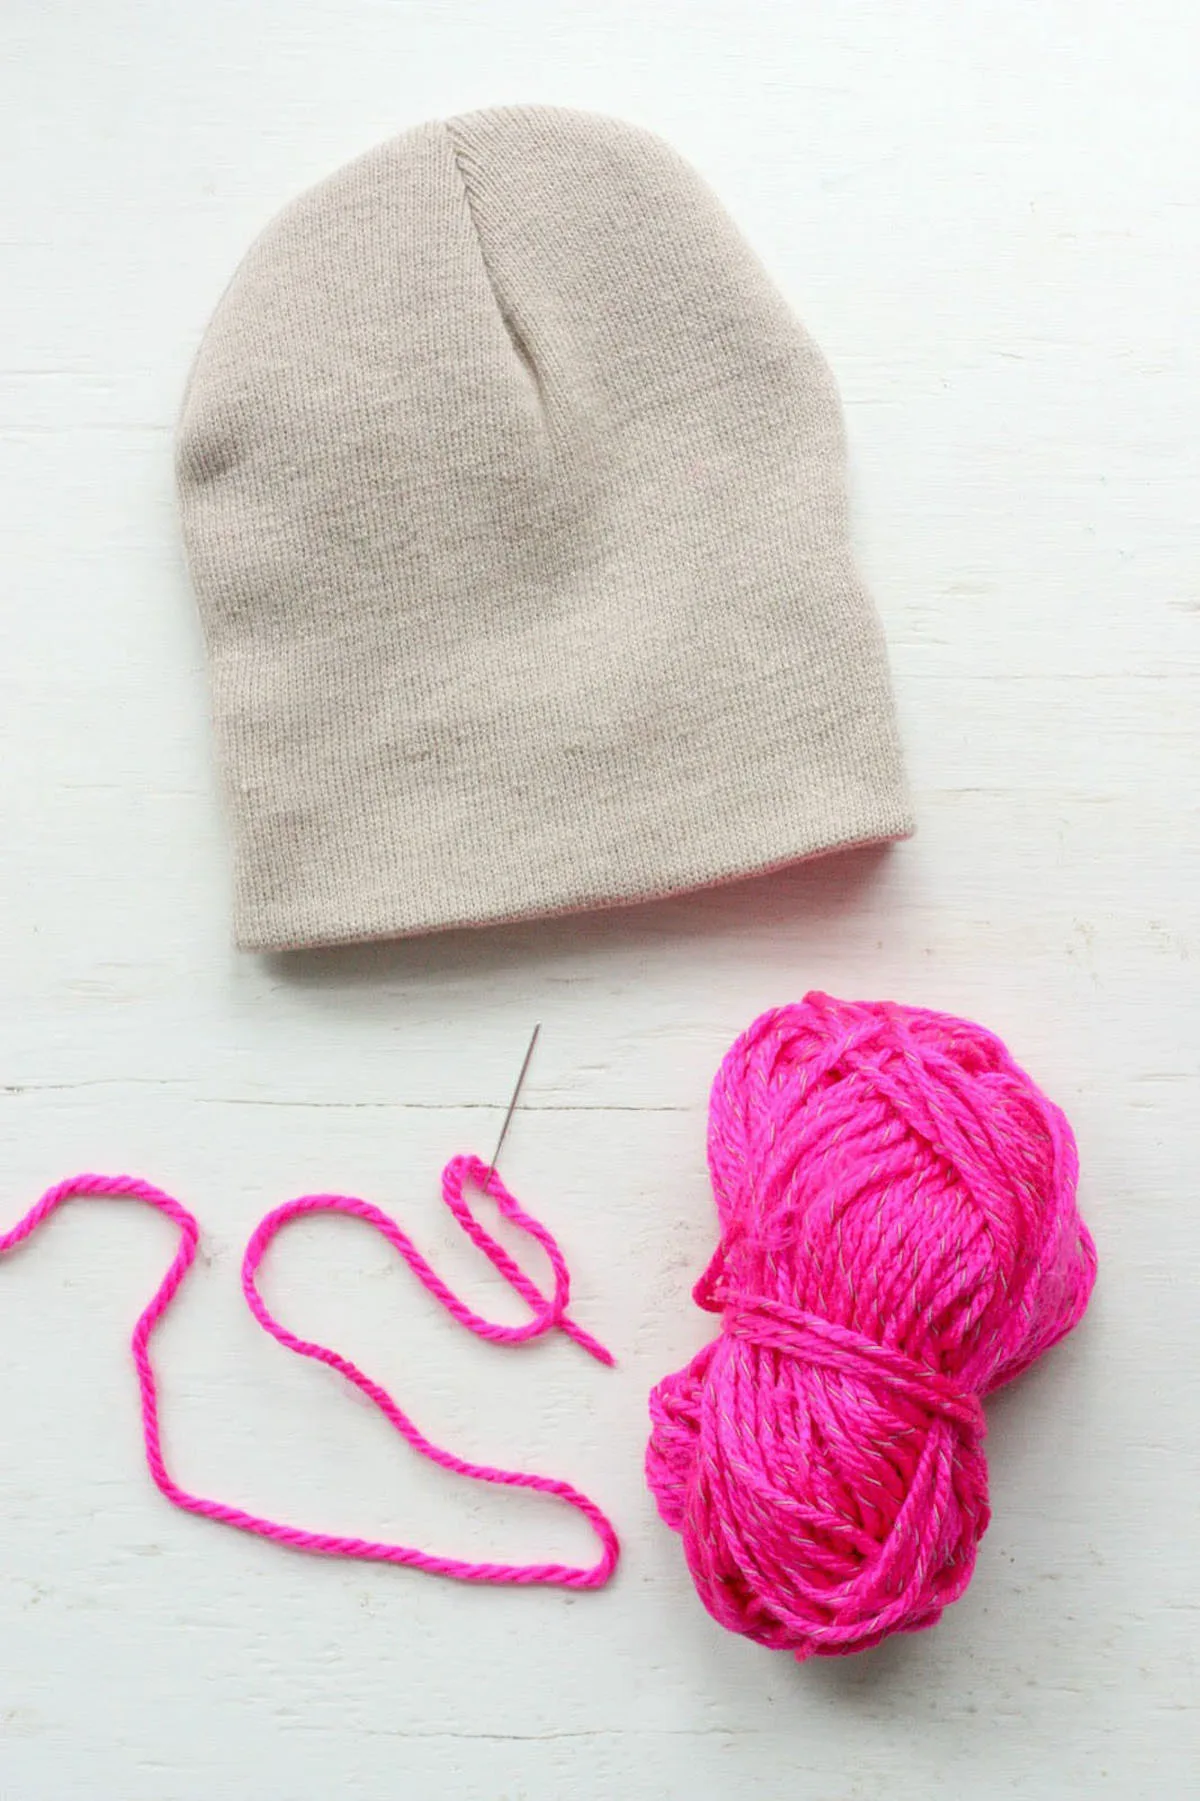 Plain tan beanie with pink yarn on a needle